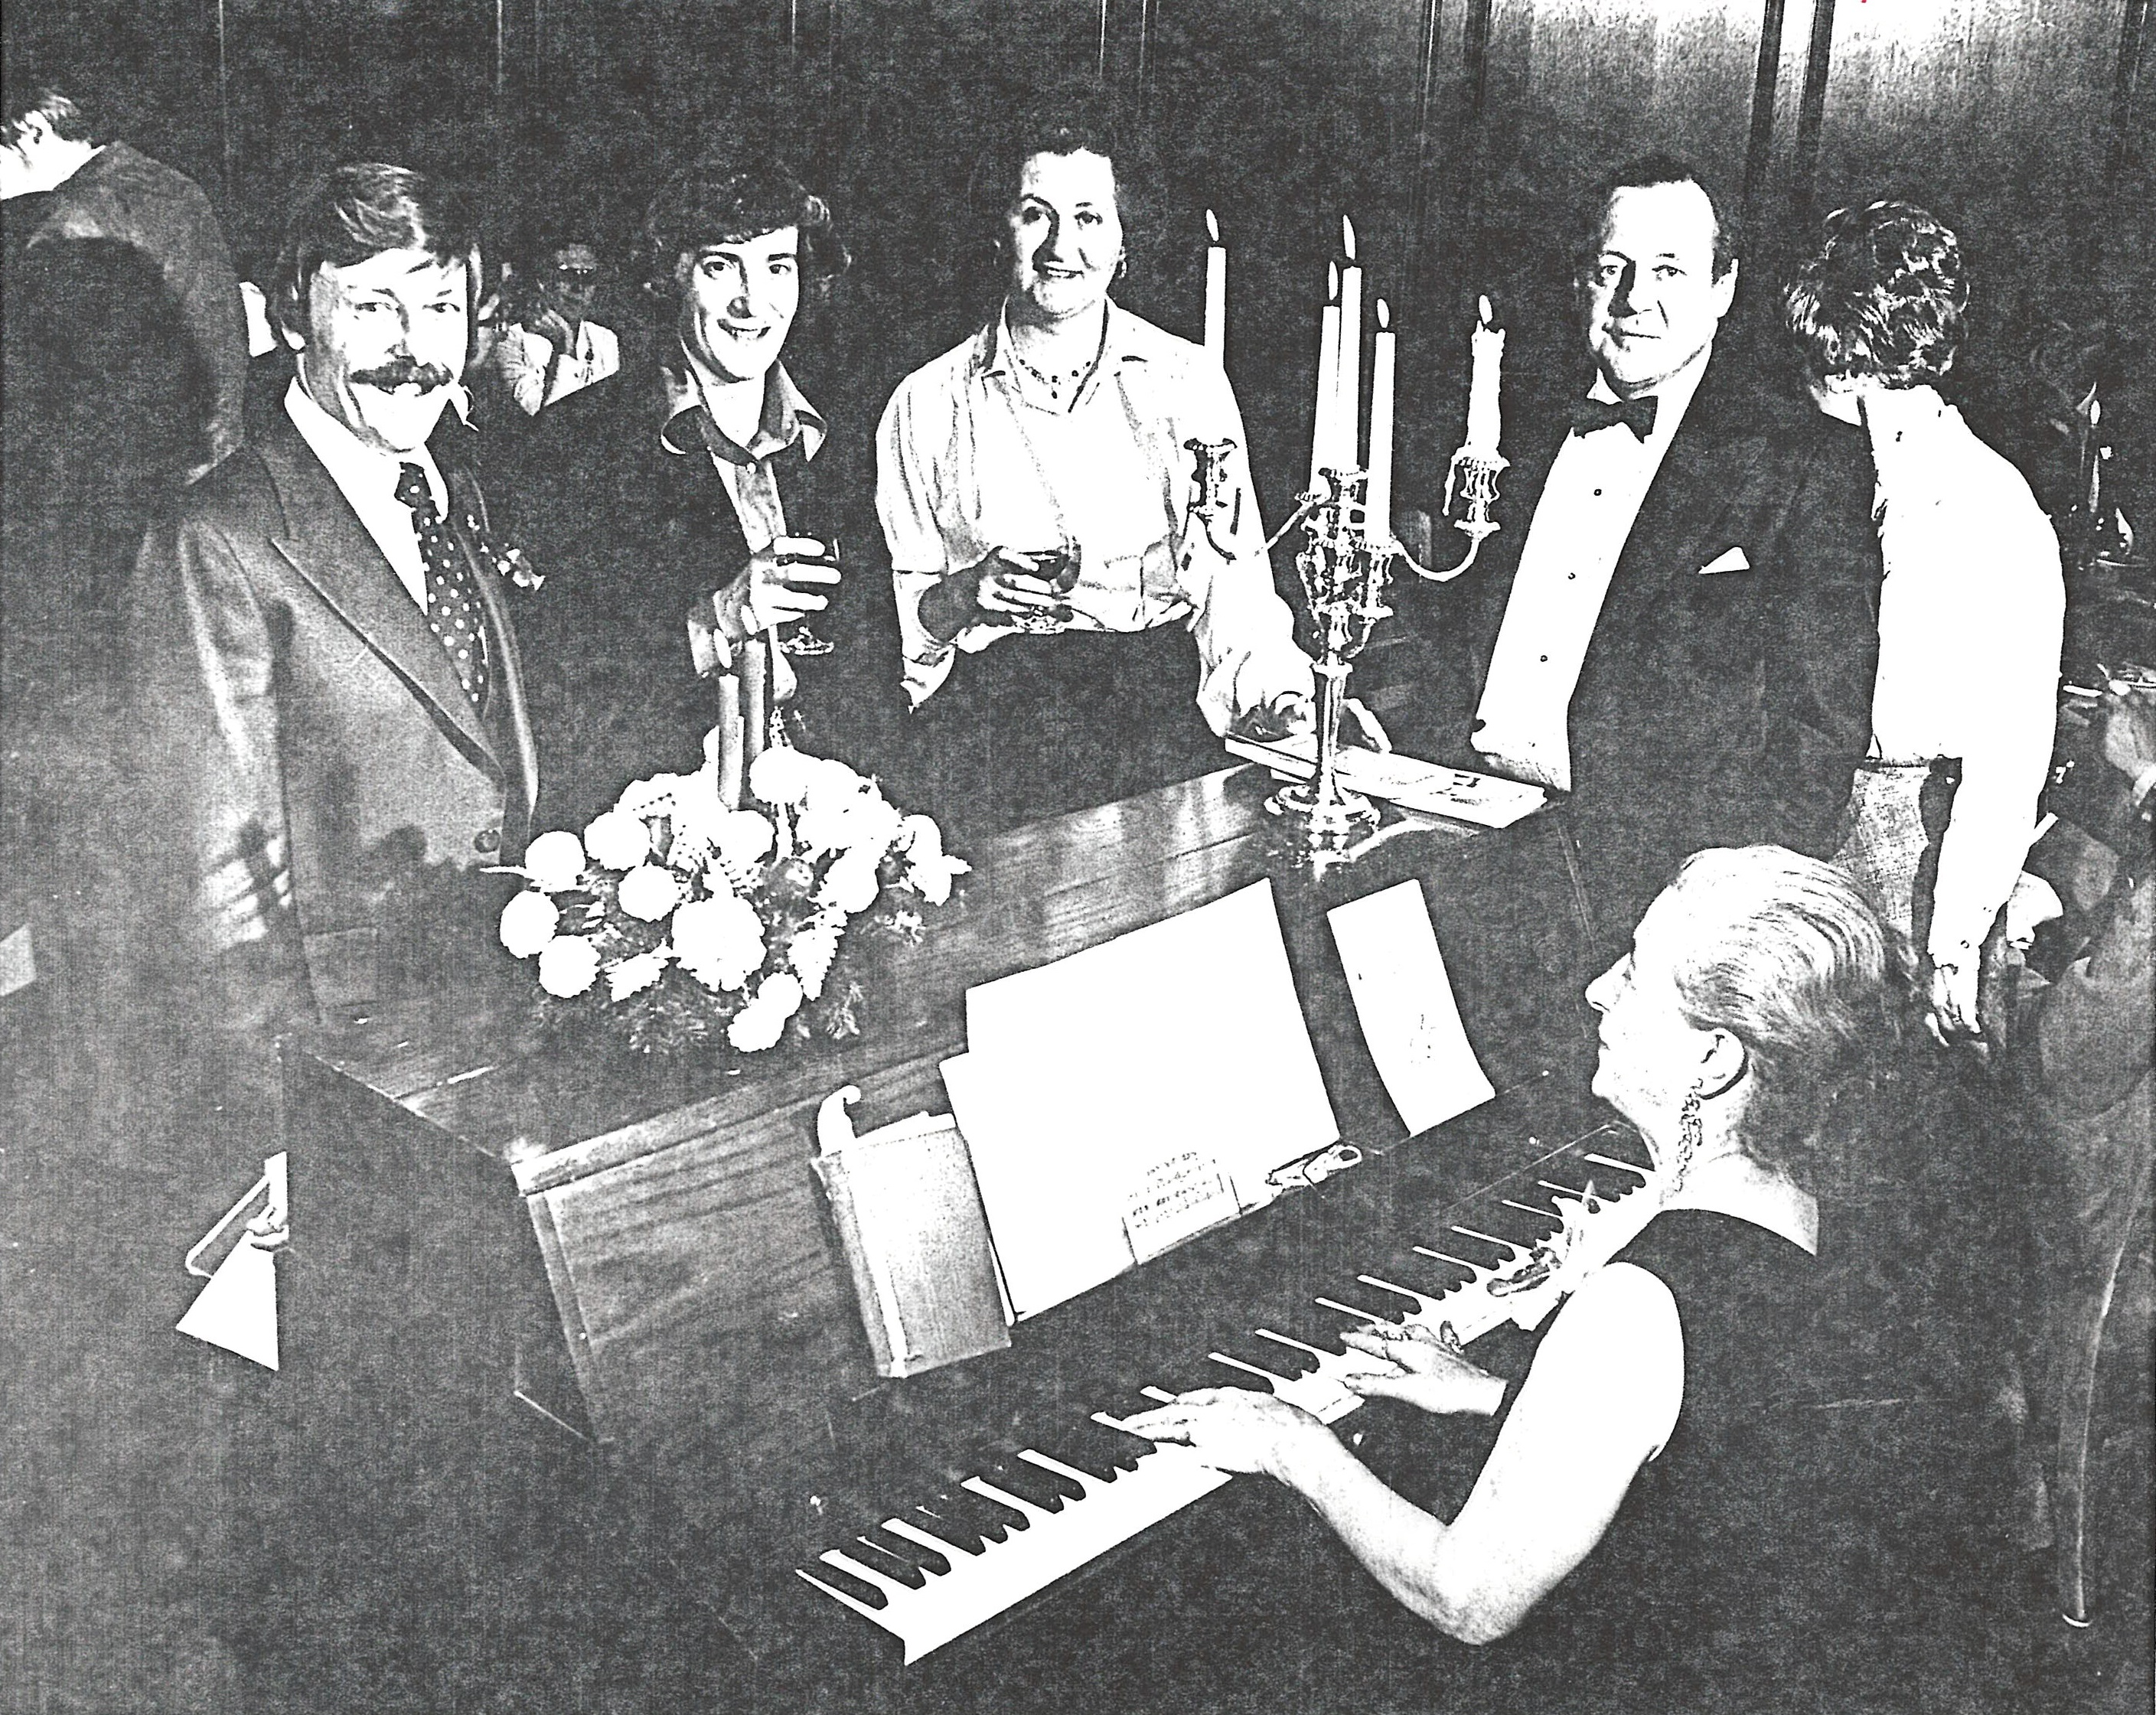 4 board members stand at piano during party